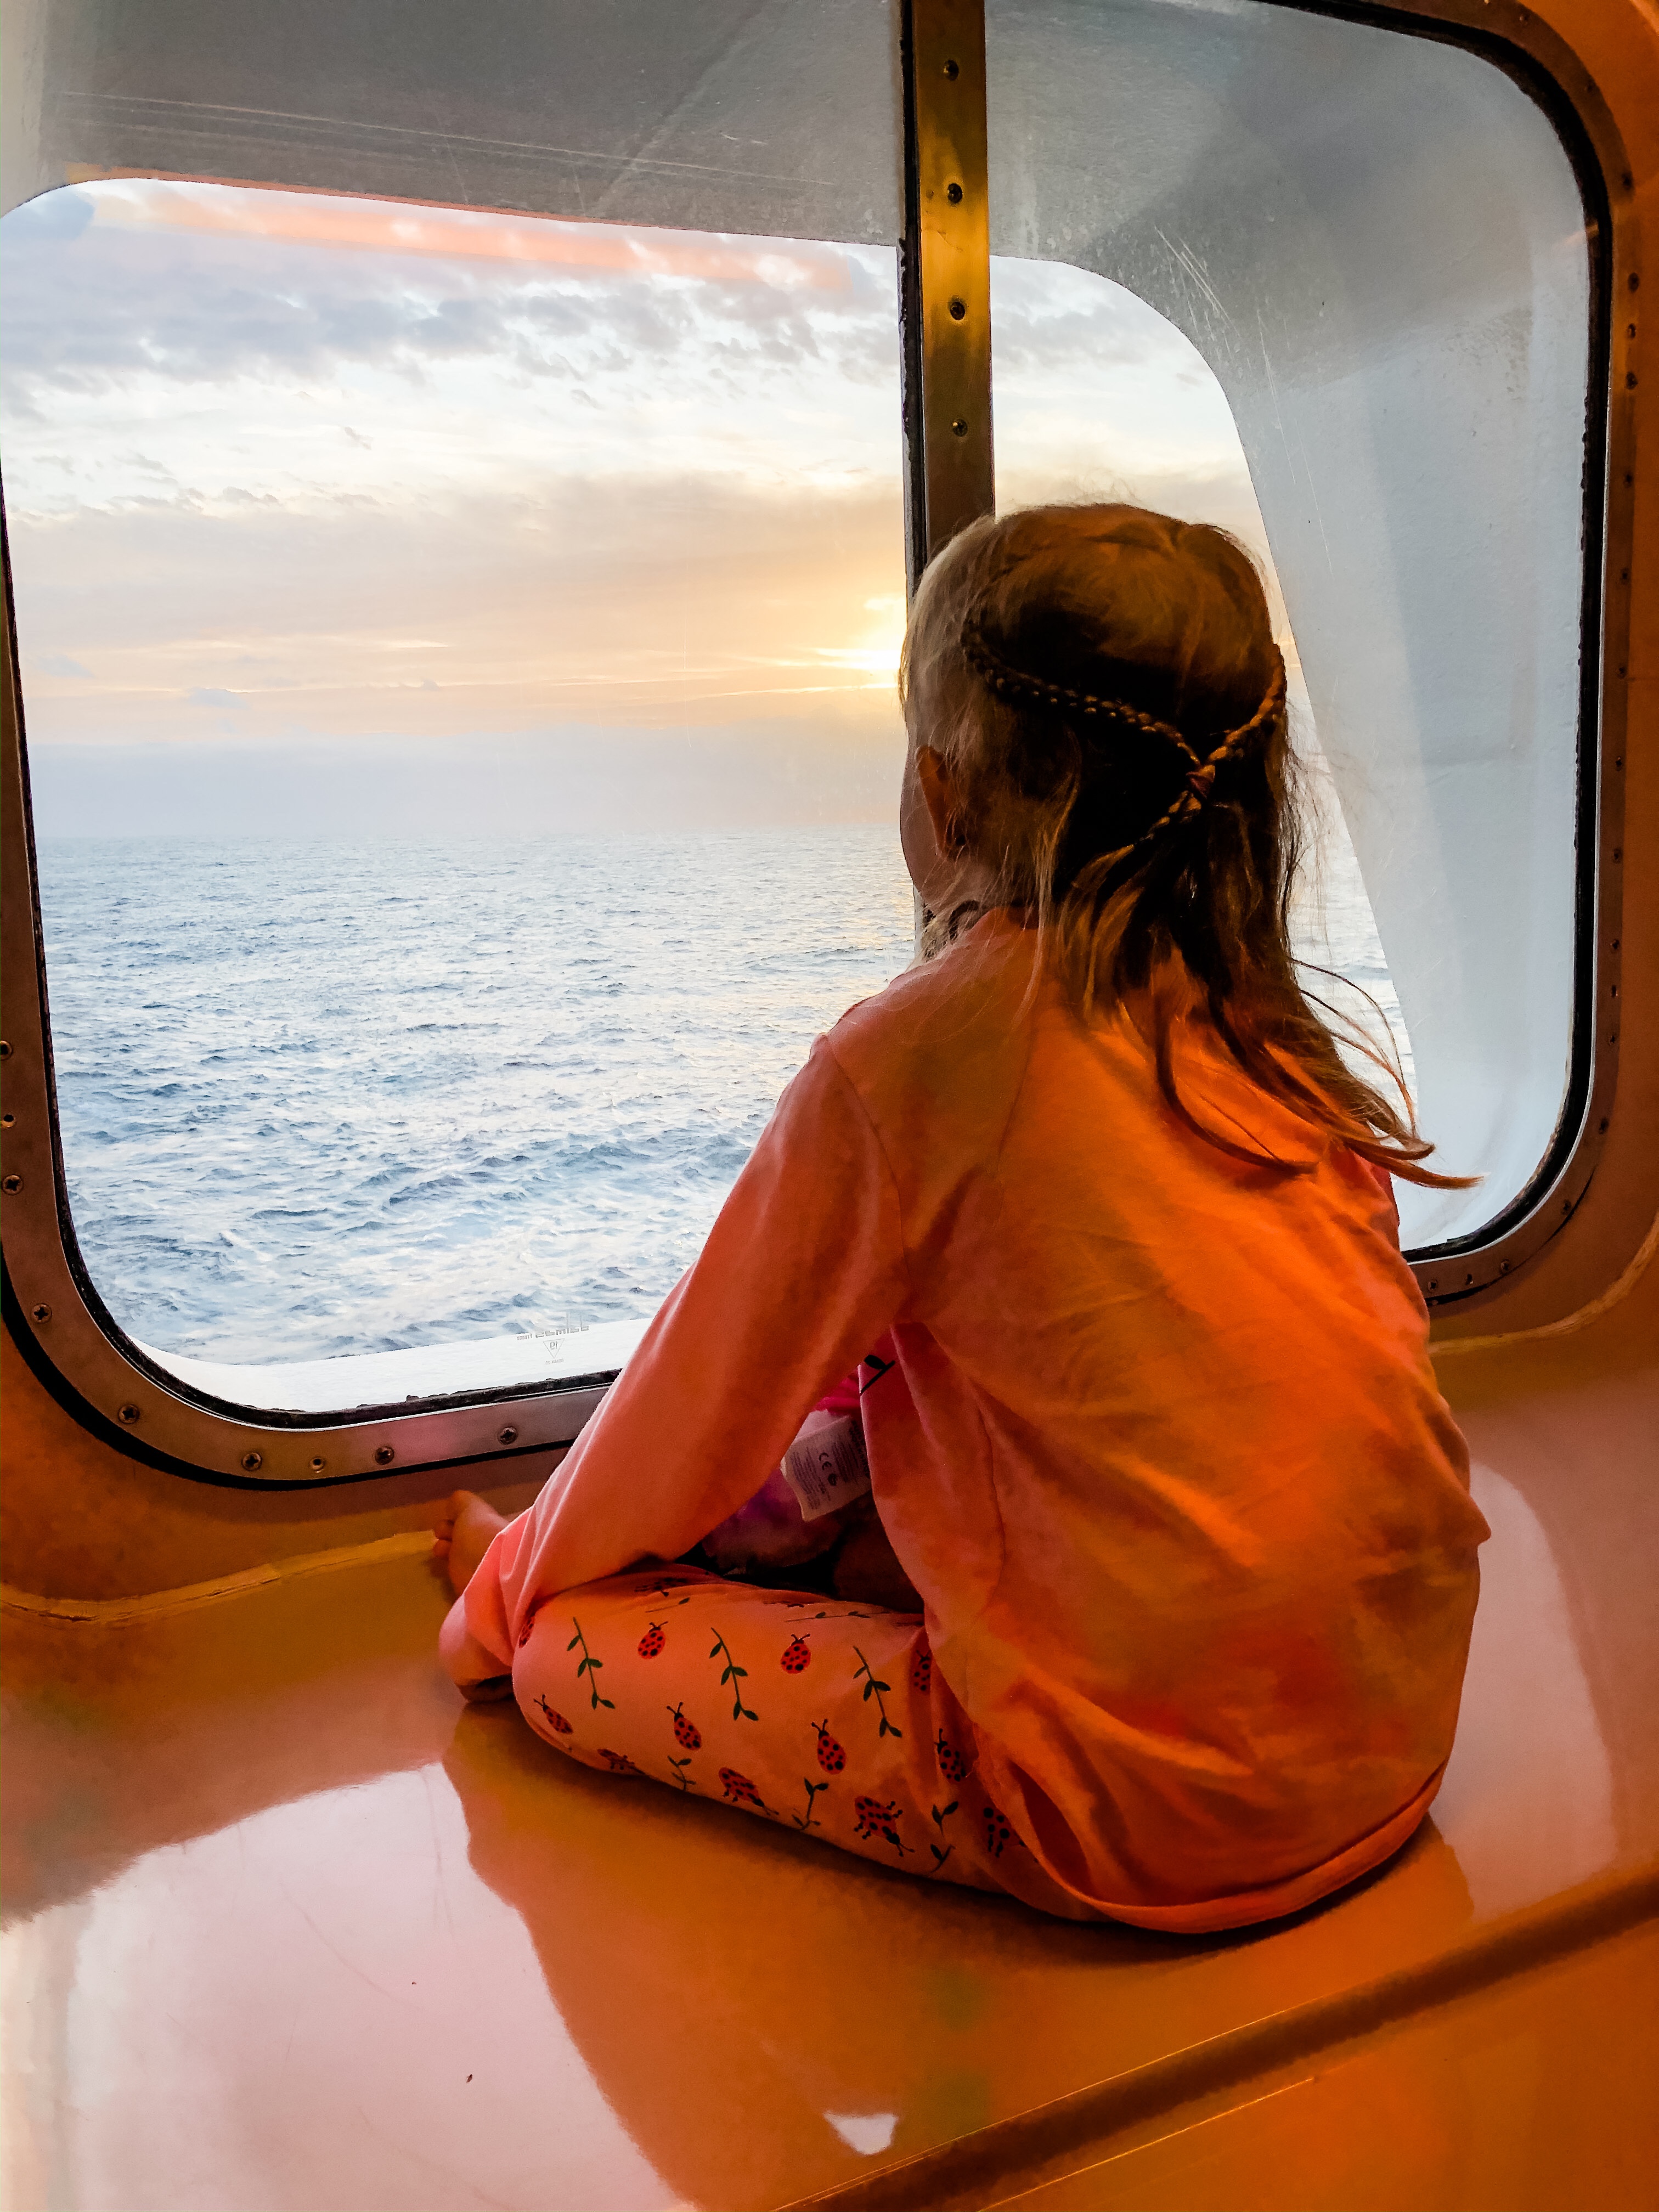 Dylan Jude looks out at the ocean on a cruise ship 